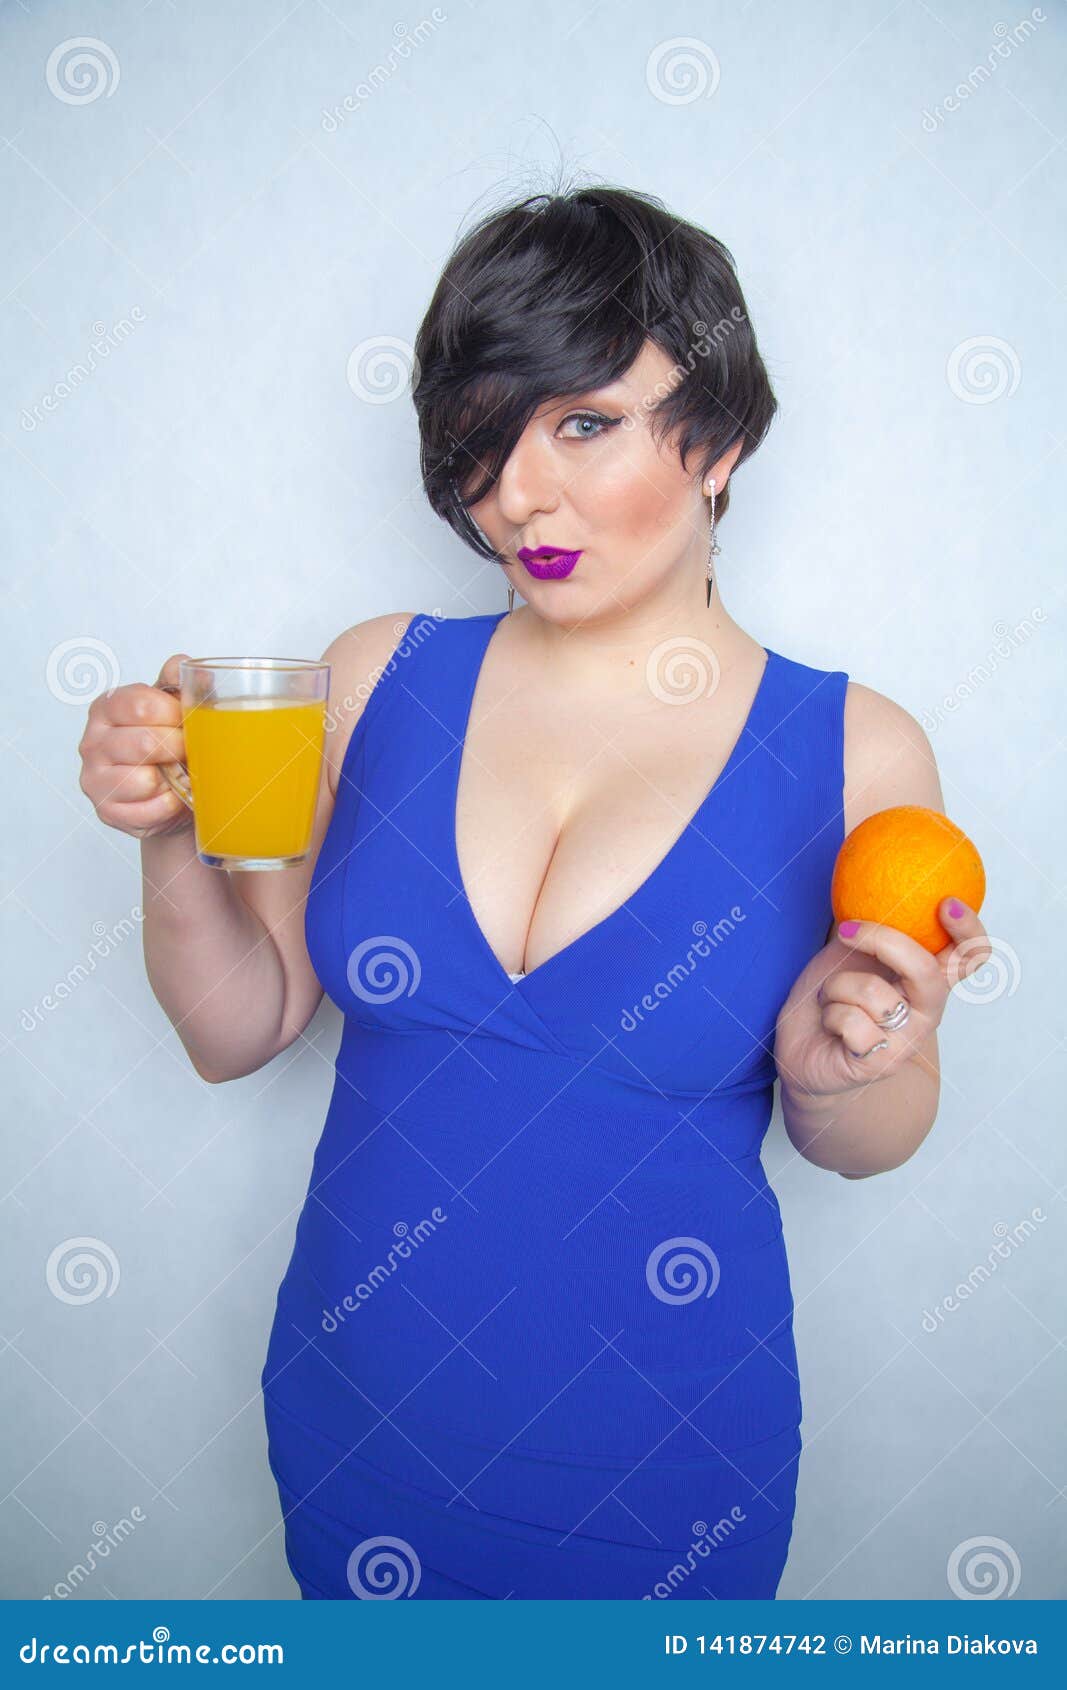 Sexy Chubby Stock Images Download 184 Royalty Free Photos